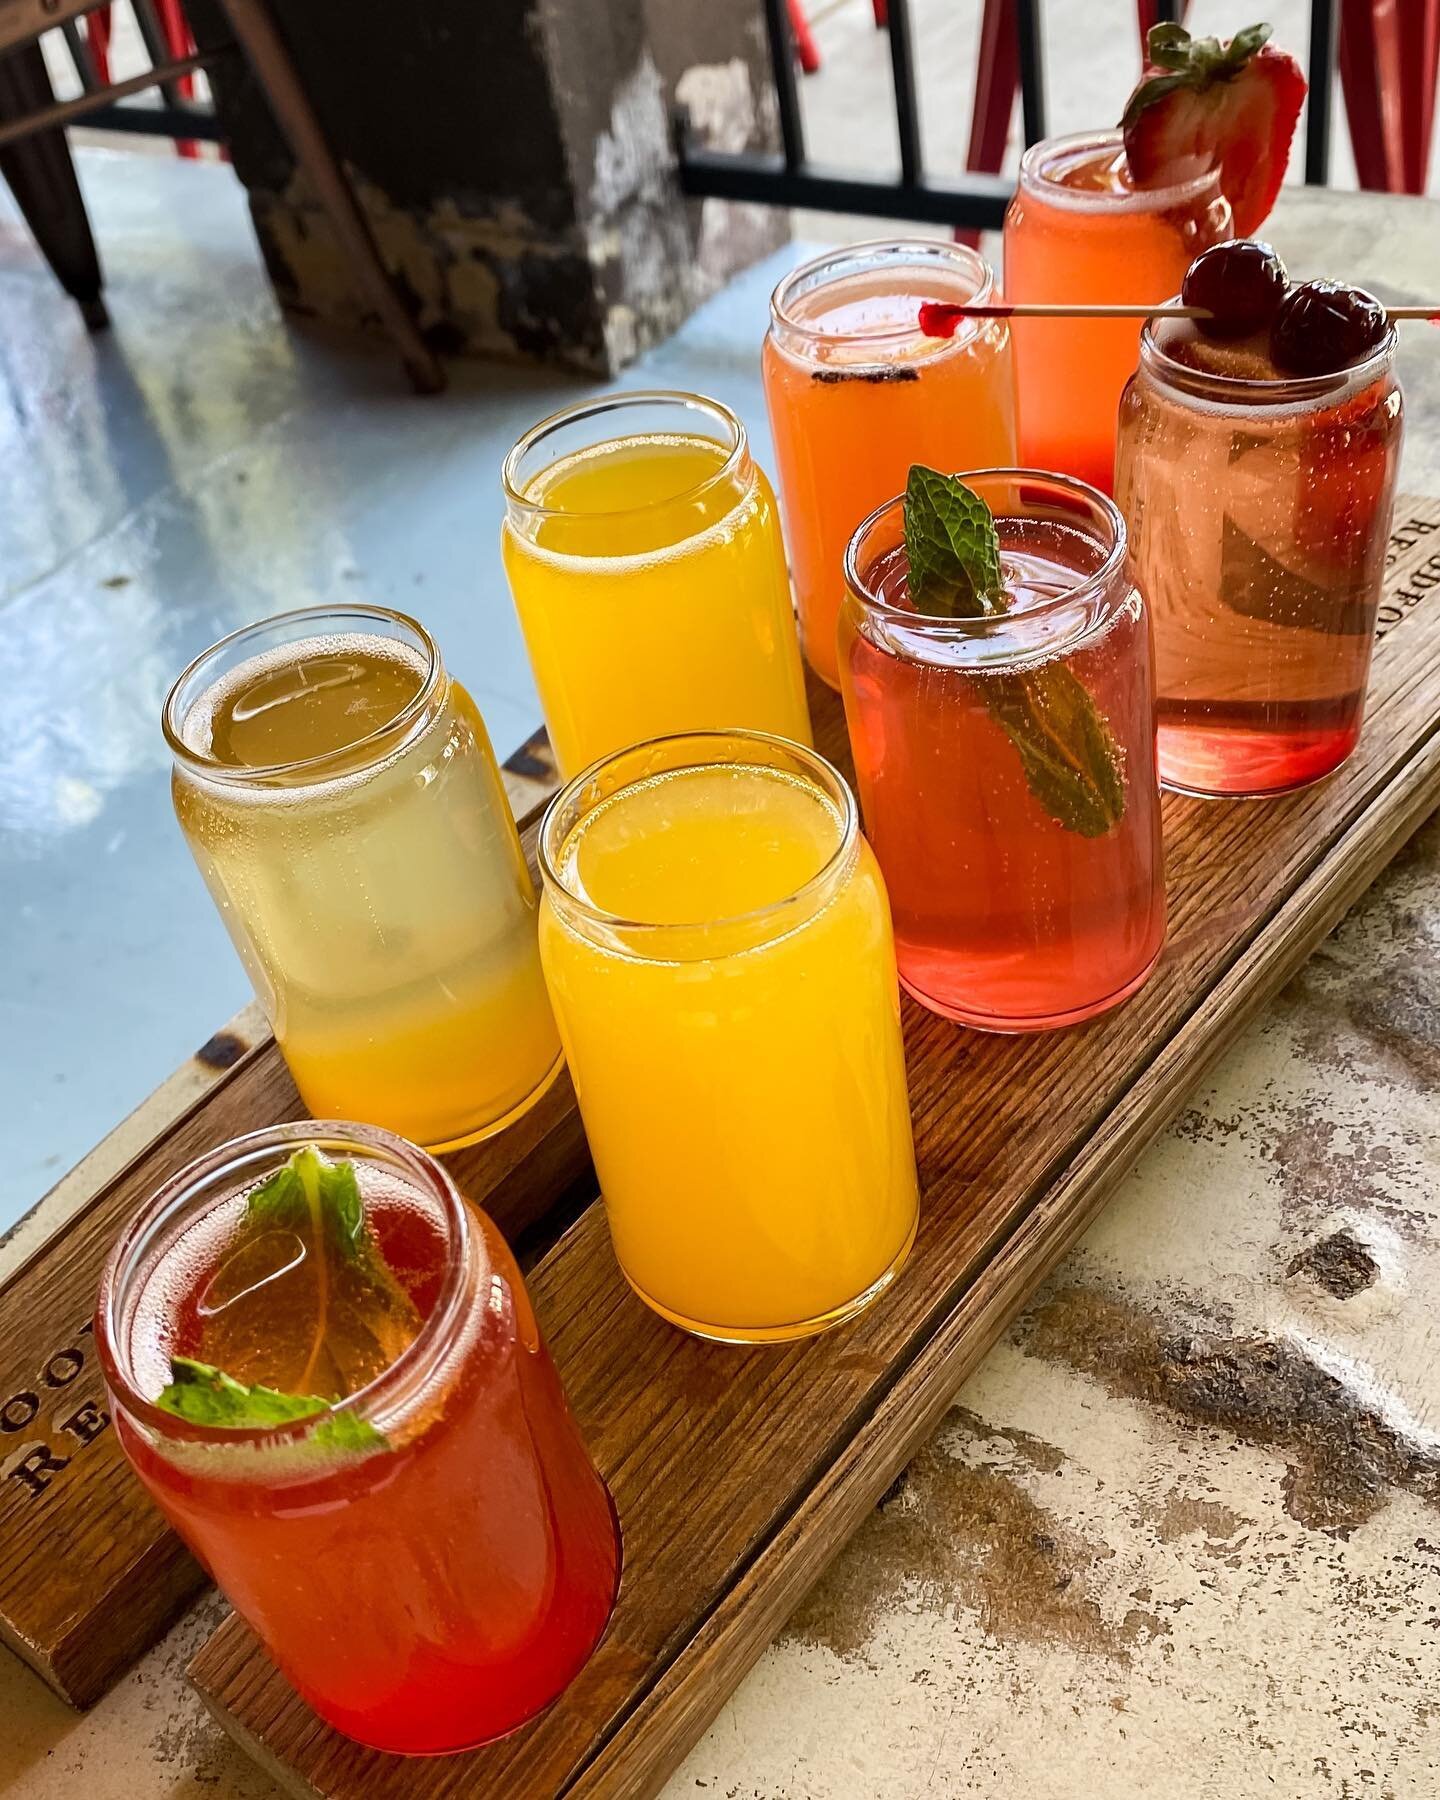 Weekends are for Mimosa Flights🙌🏼

➖➖➖➖➖➖➖➖➖➖➖➖
Downtown LV
📍 1120 S Main St Suite 110
Downtown Summerlin
📍 2120 Festival Plaza Dr Unit 140
 Area 15 
📍 3215 S Rancho Dr
📍 Henderson(Spring 2023)
➖➖➖➖➖➖➖➖➖➖

#MAKERSLV #DTLV #coffeeshop #vegascoff